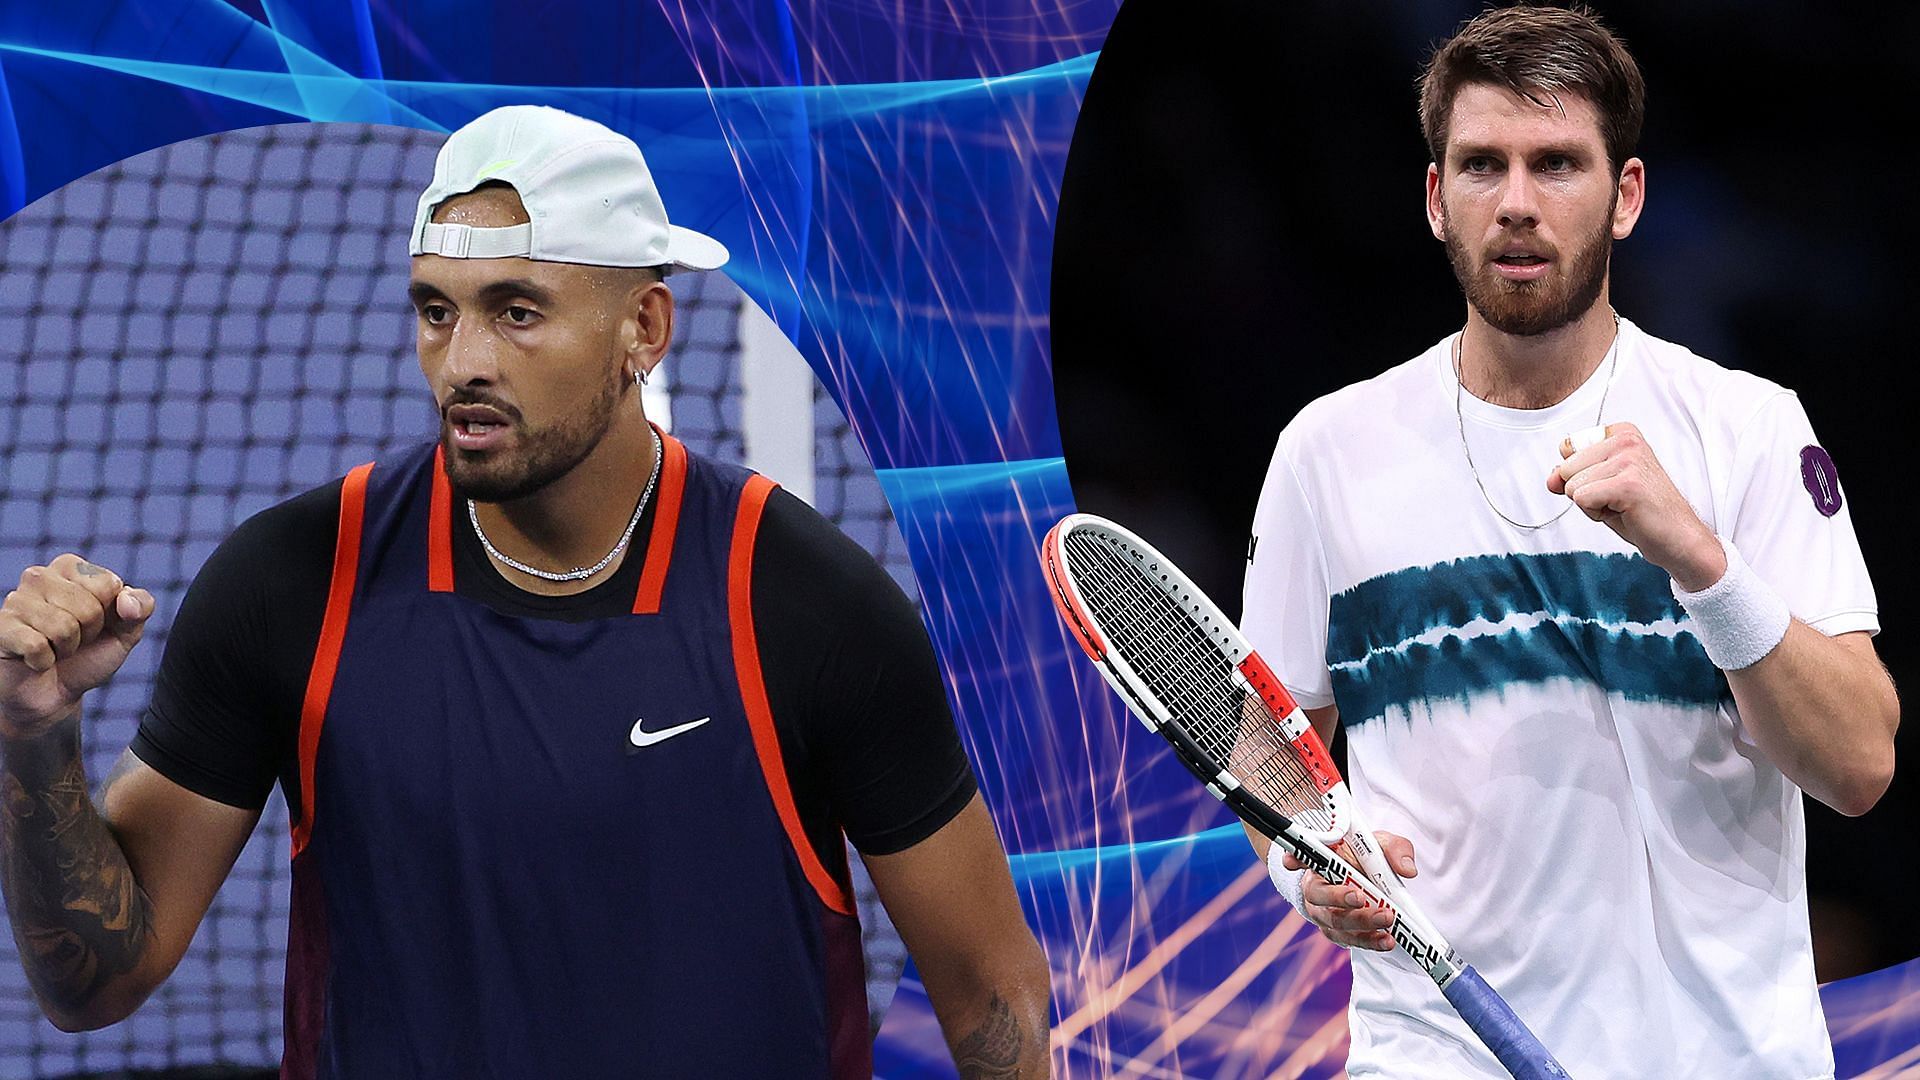 Nick Kyrgios will face Cameron Norrie in the group stage of the United Cup